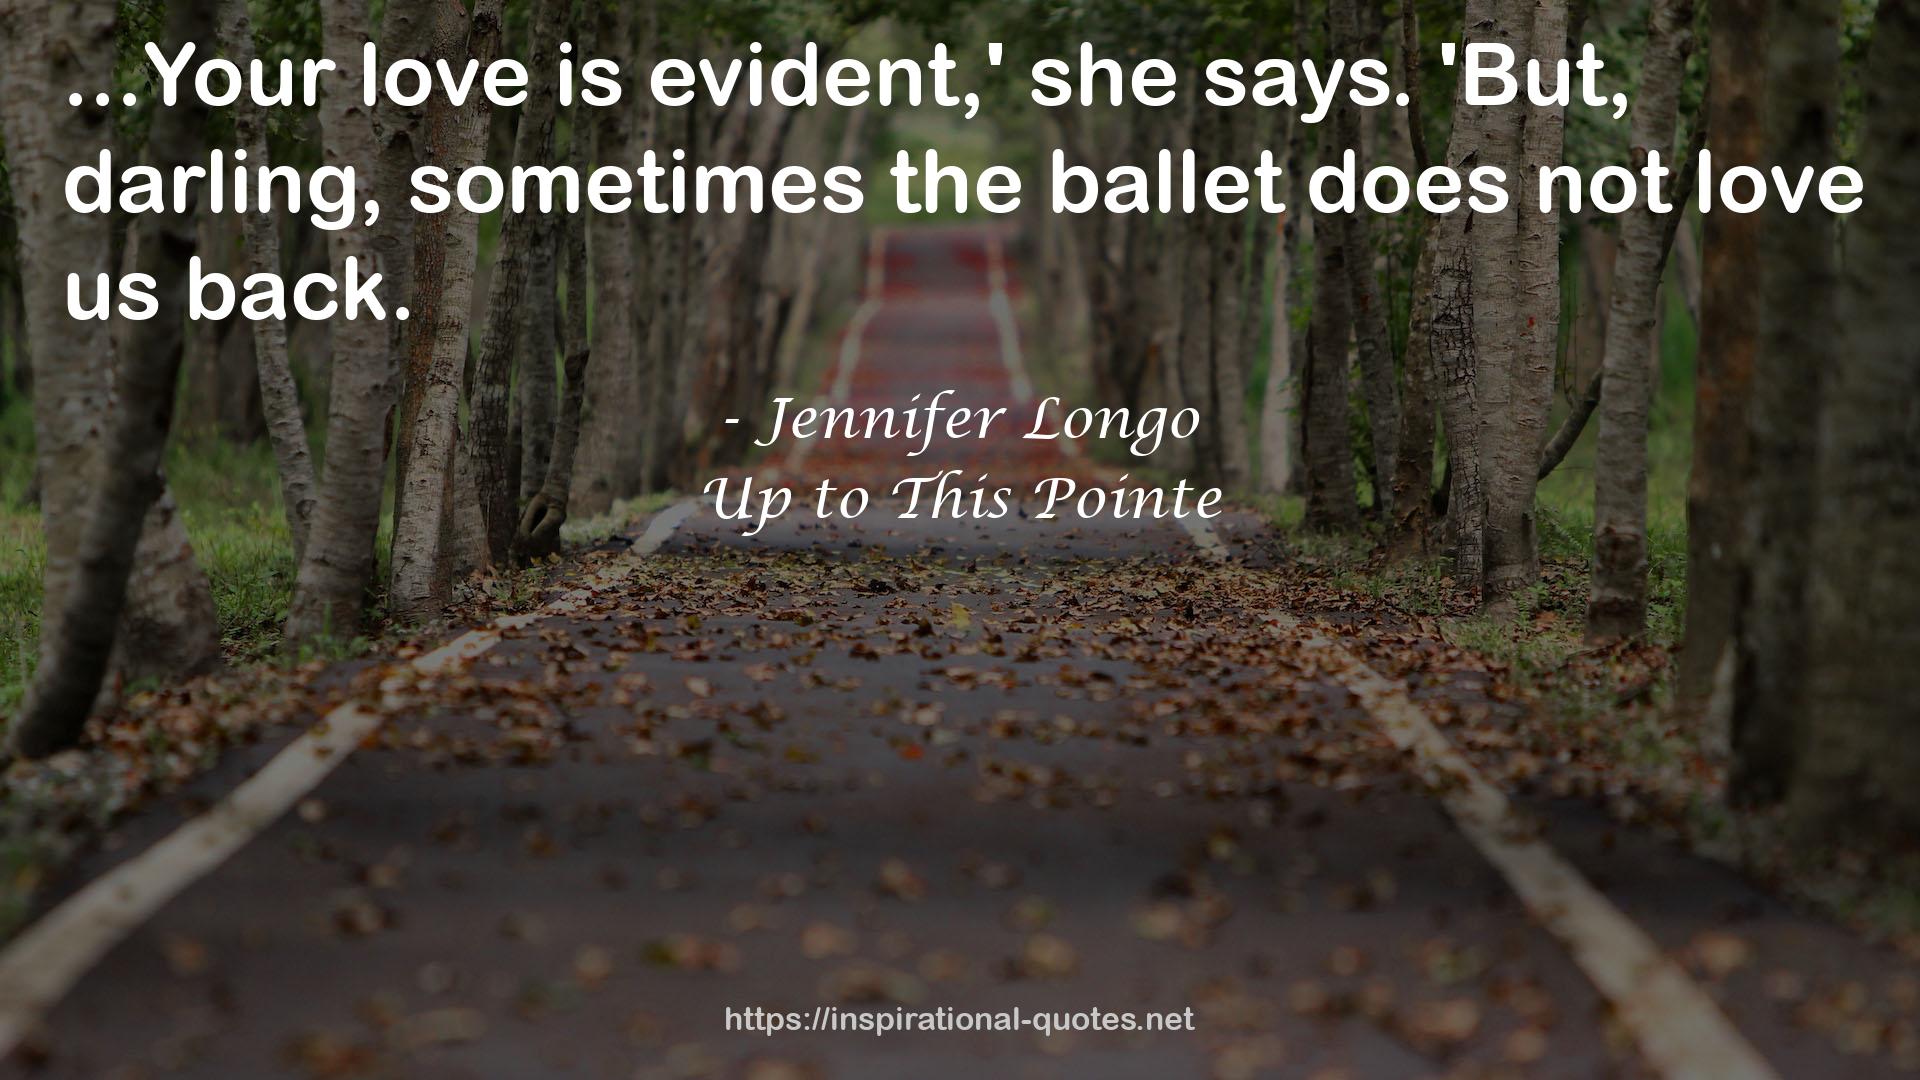 Up to This Pointe QUOTES